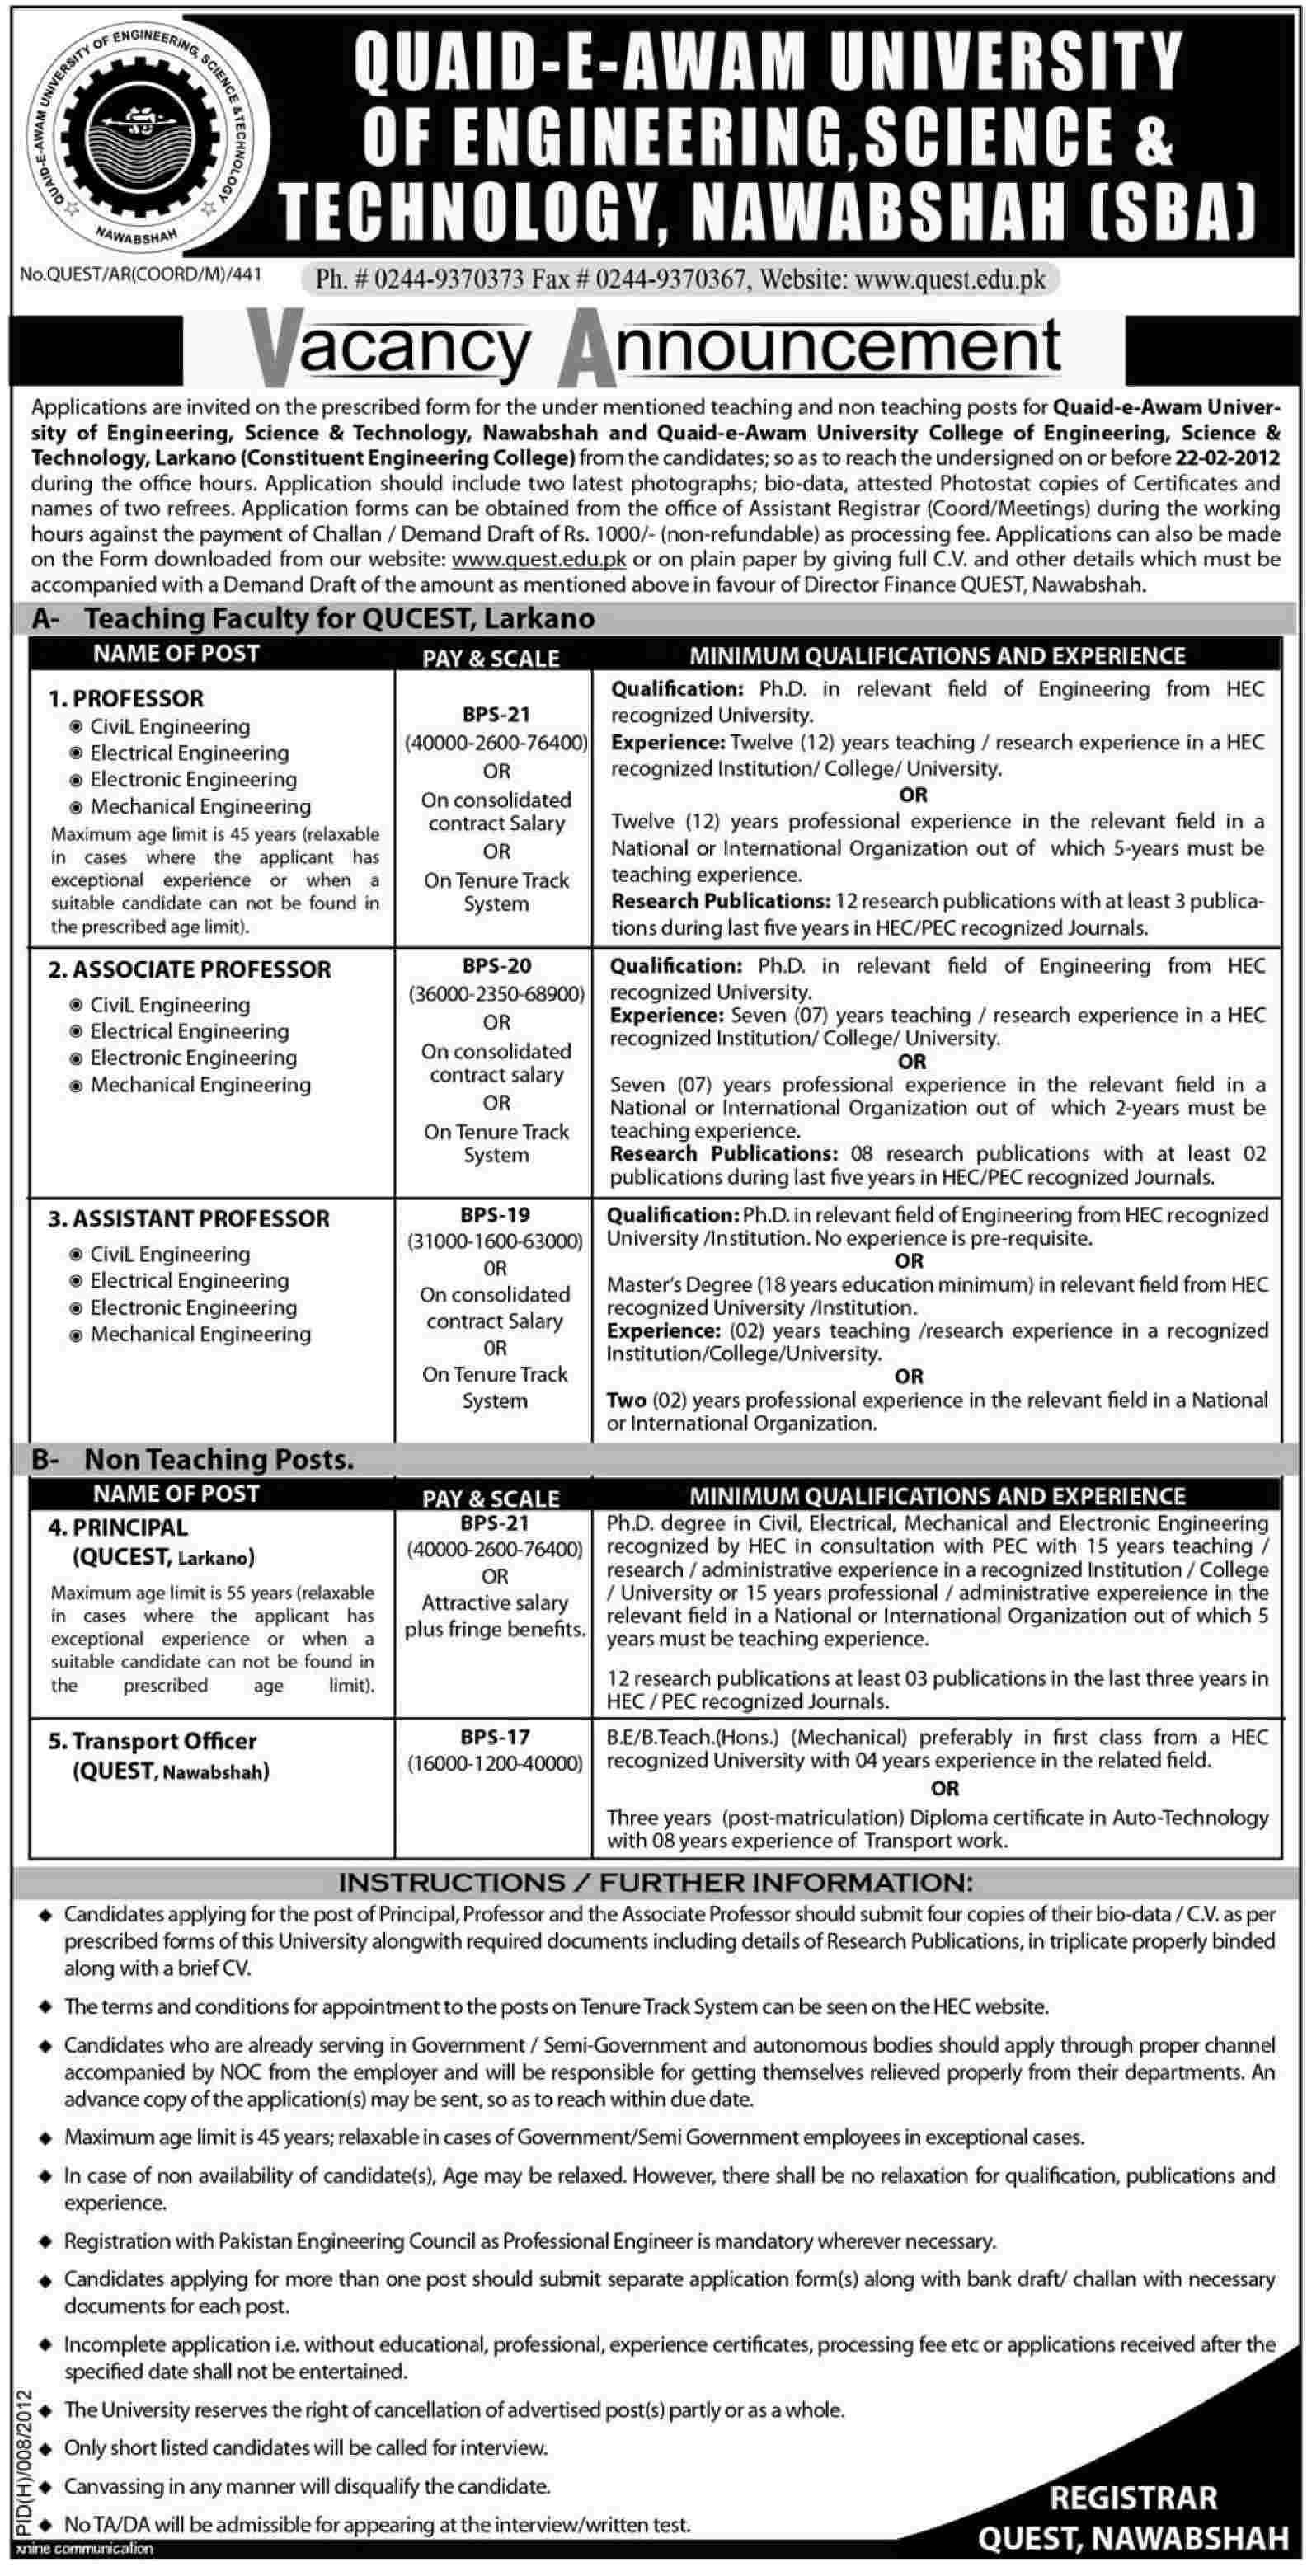 Quaid e Awam University of Engineering, Science and Technology, Nawabshah. Jobs Opportunity